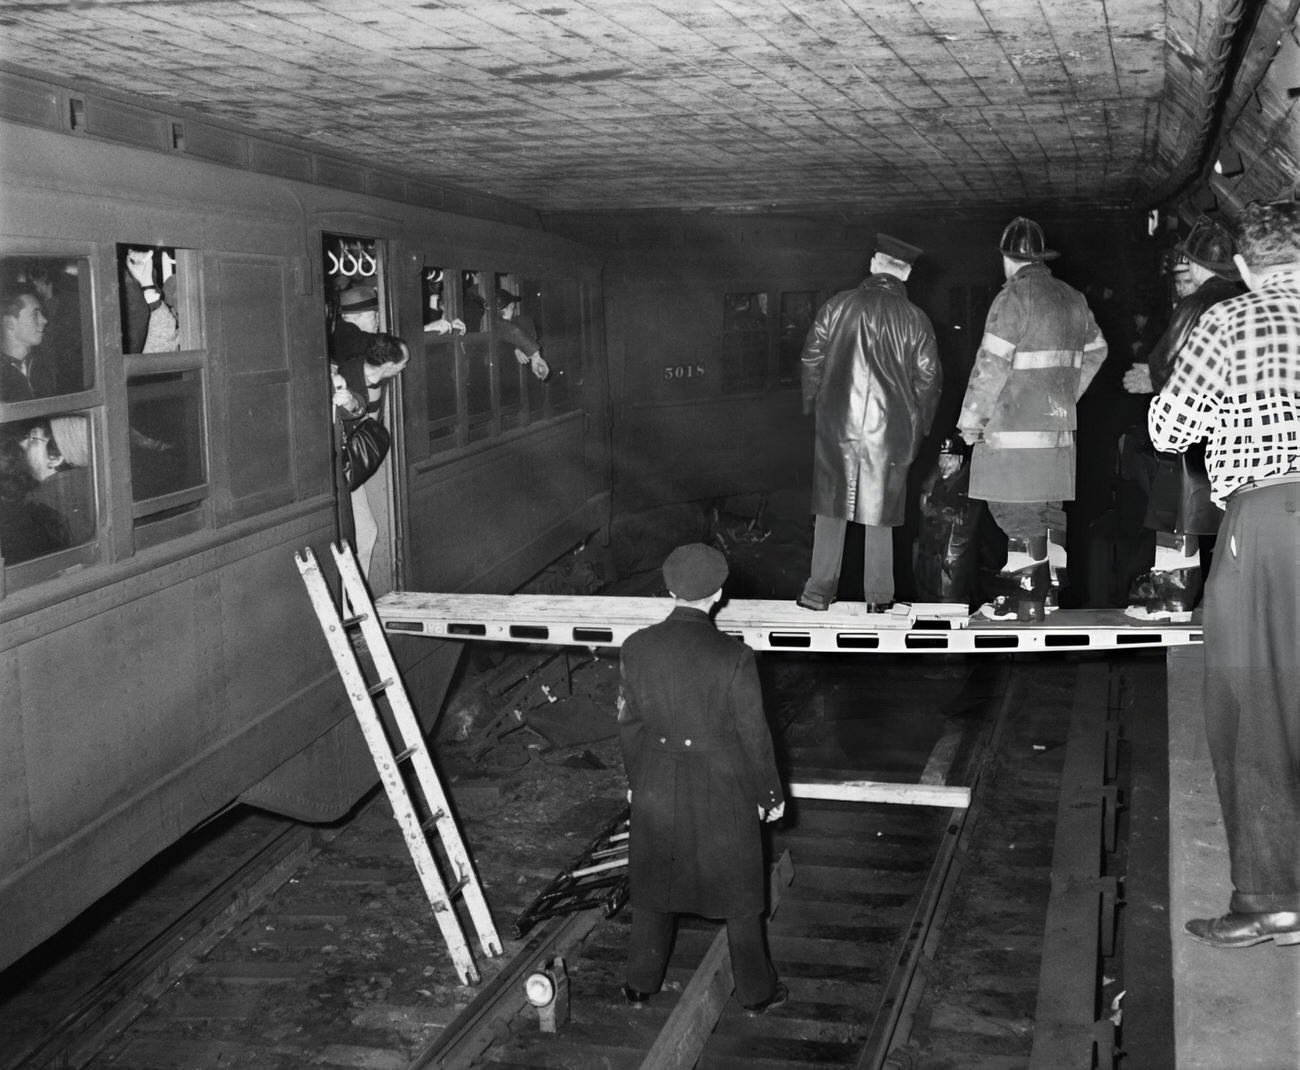 Firefighters Evacuate Passengers From A Derailed Irt Subway Train Near The 138Th Street Station In The Bronx, 1961